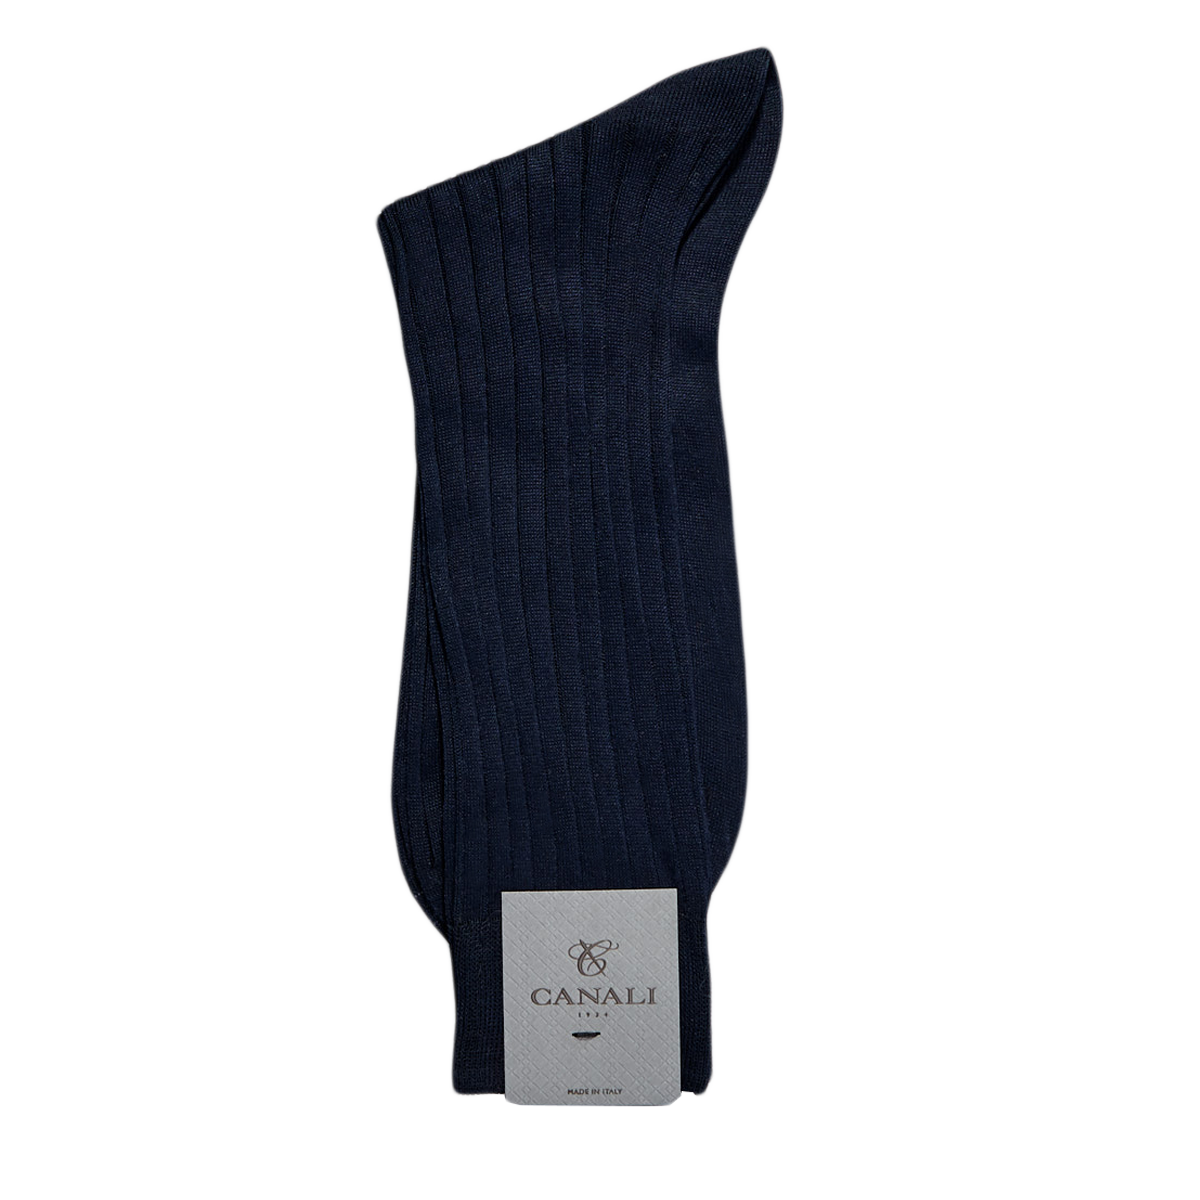 A pair of Canali Navy Ribbed Cotton Socks on a white background providing a seamless experience.